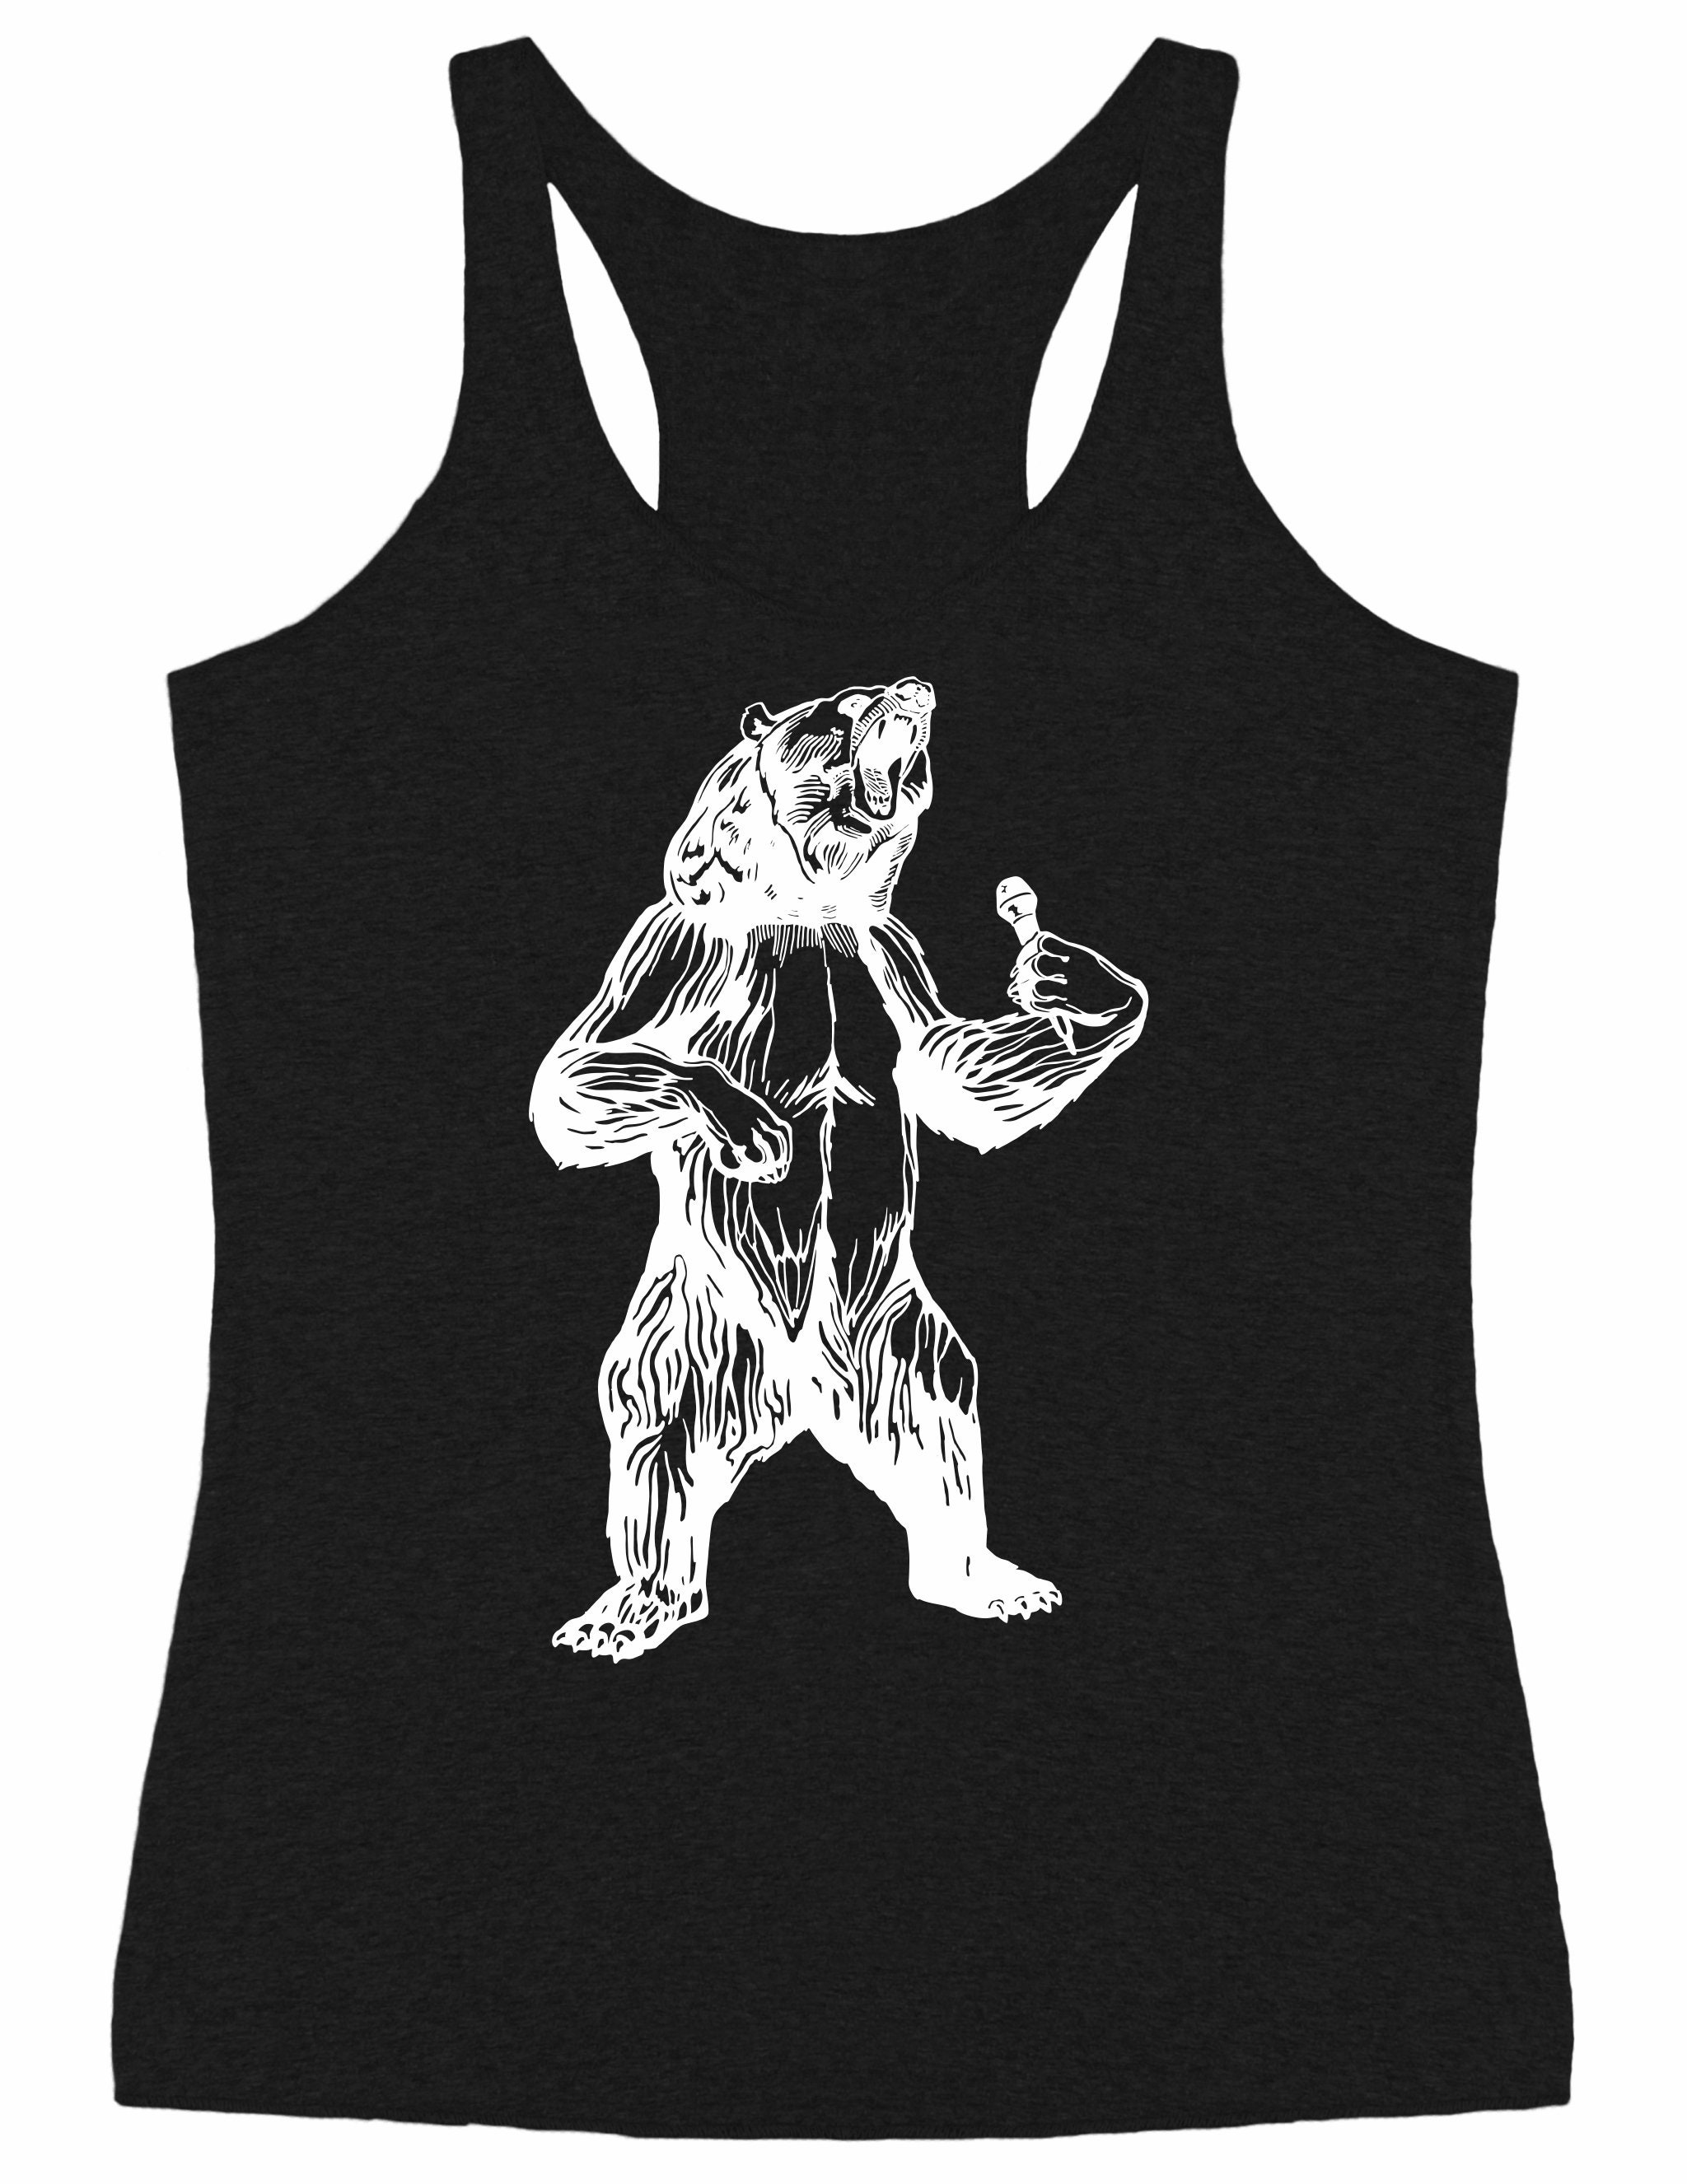 Bear Trying To Sing Women's Tri-Blend Tank Top Gift For Her, Girlfriend Birthday, Music Gifts Mom, Musician Wife Seembo